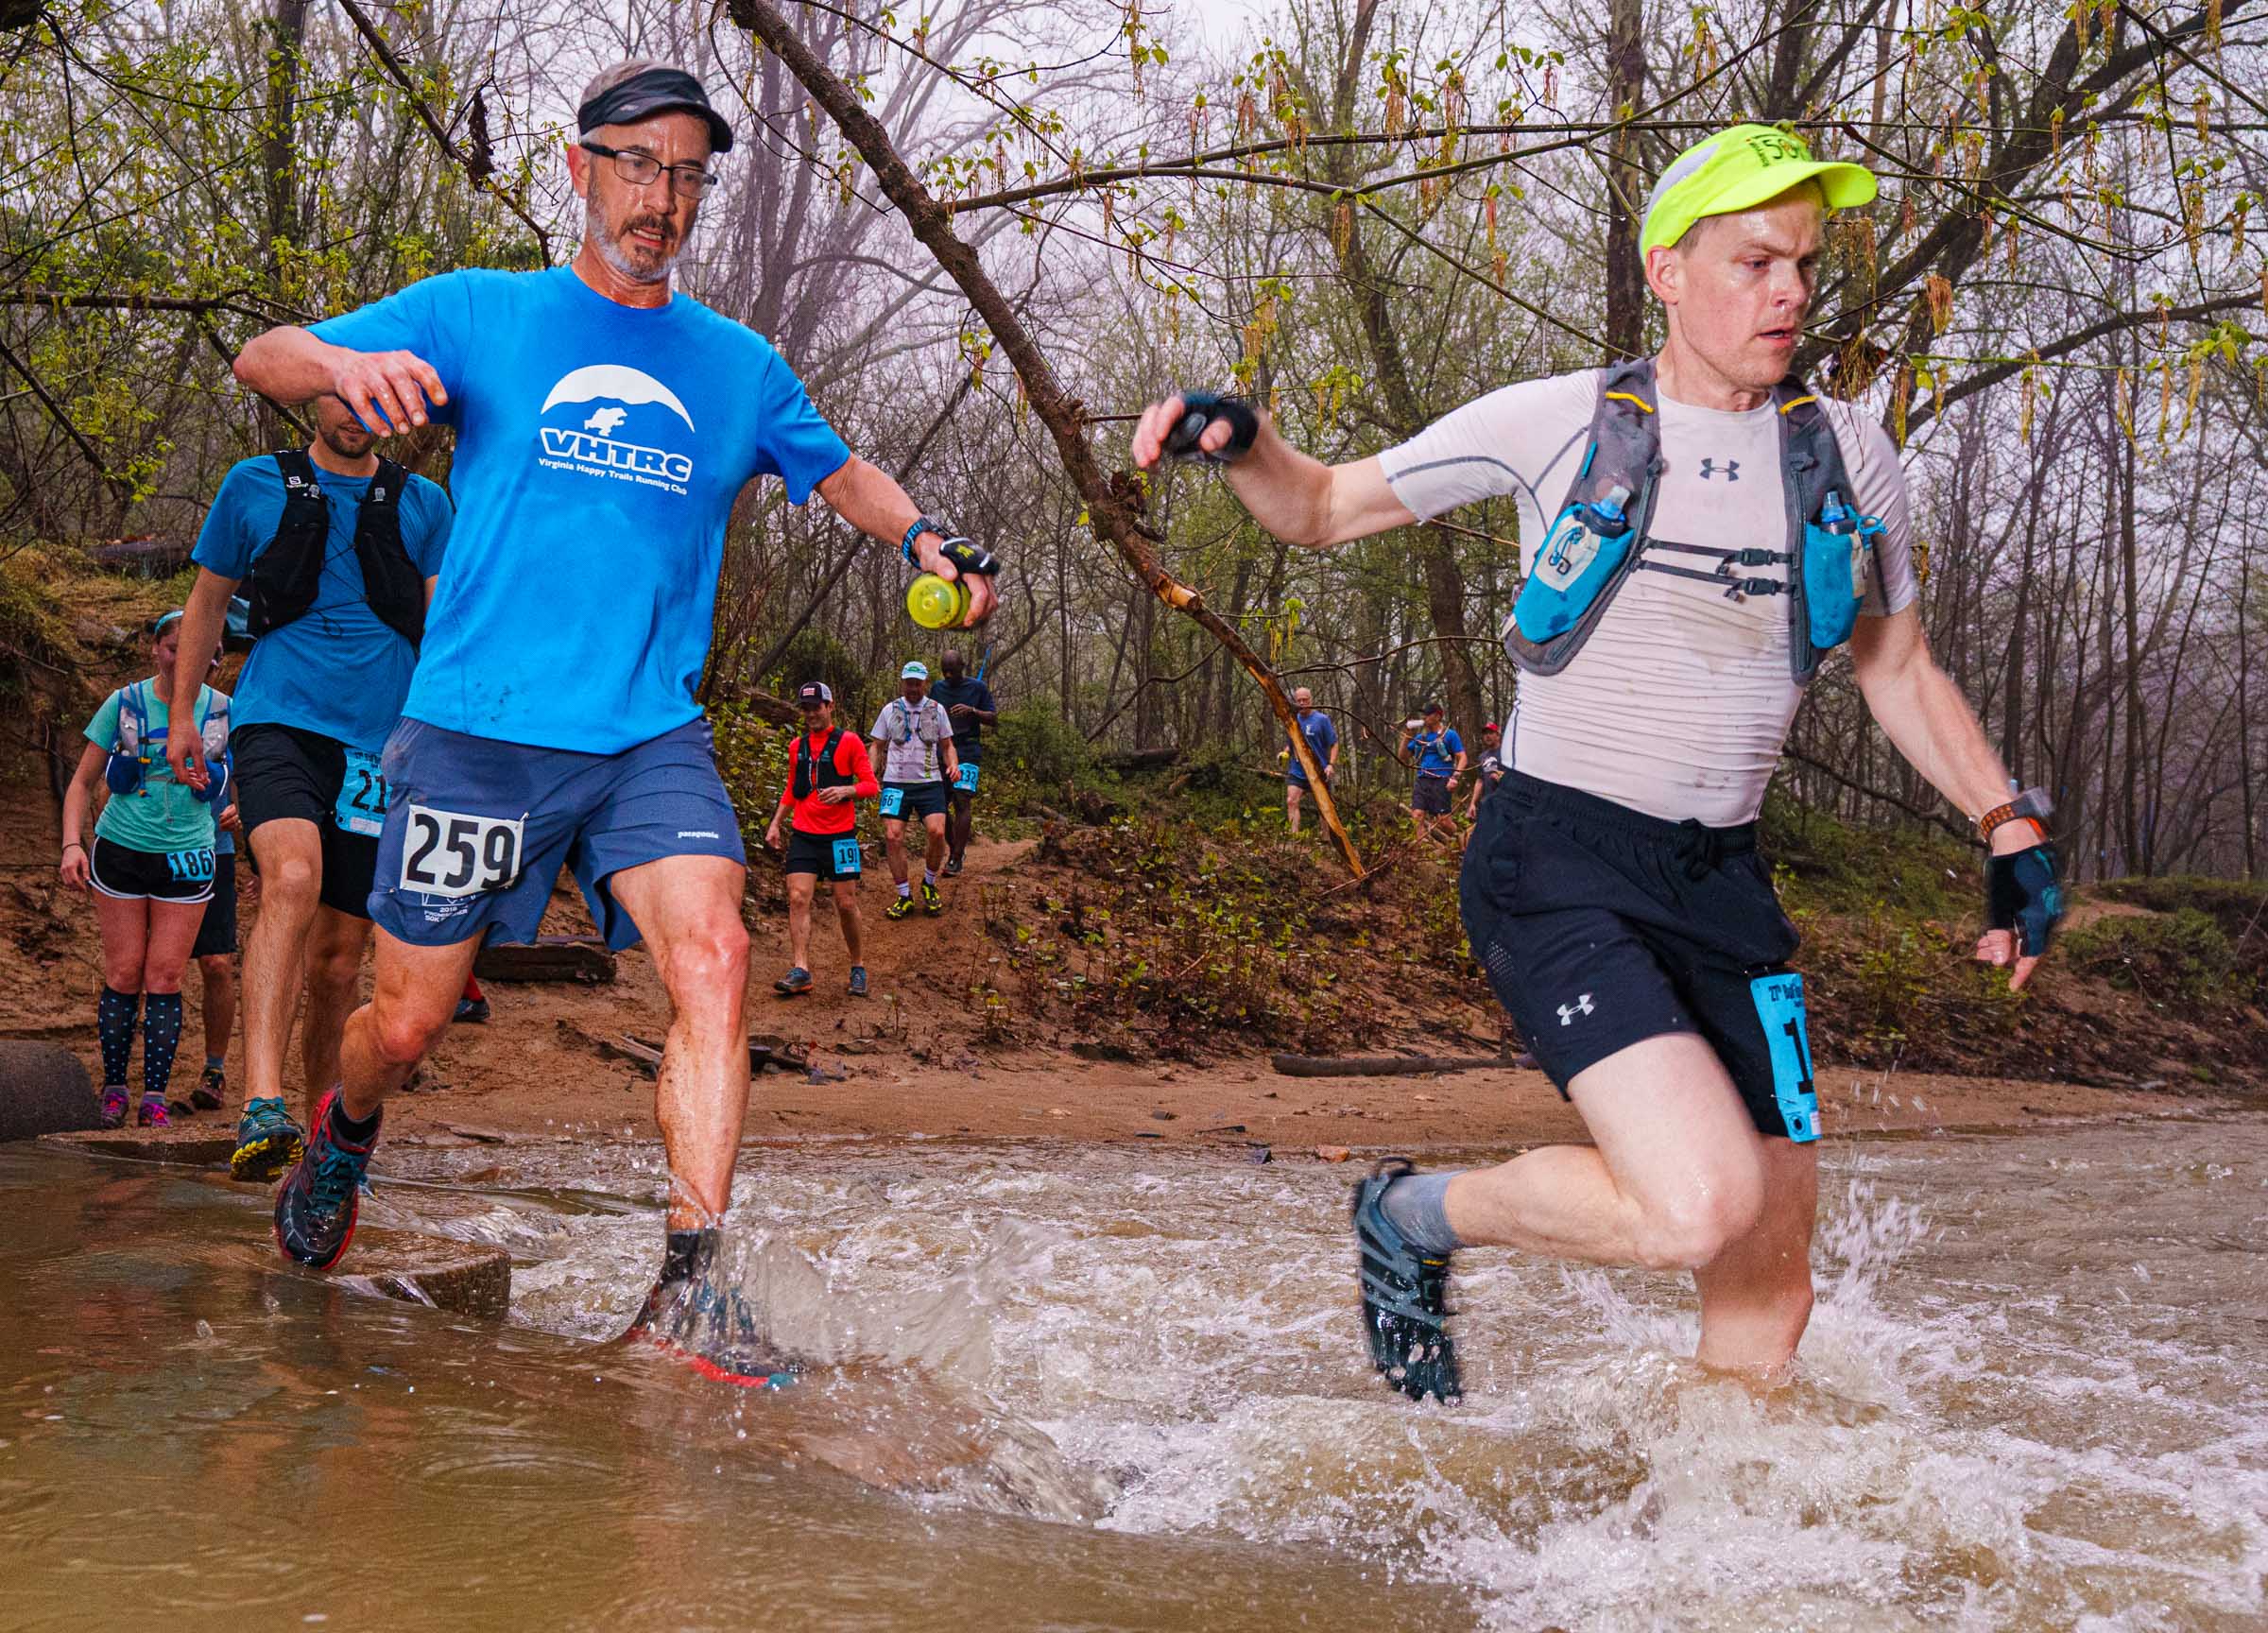 Runners crossing Popes Head Creek during the early miles of the 2019 BRR